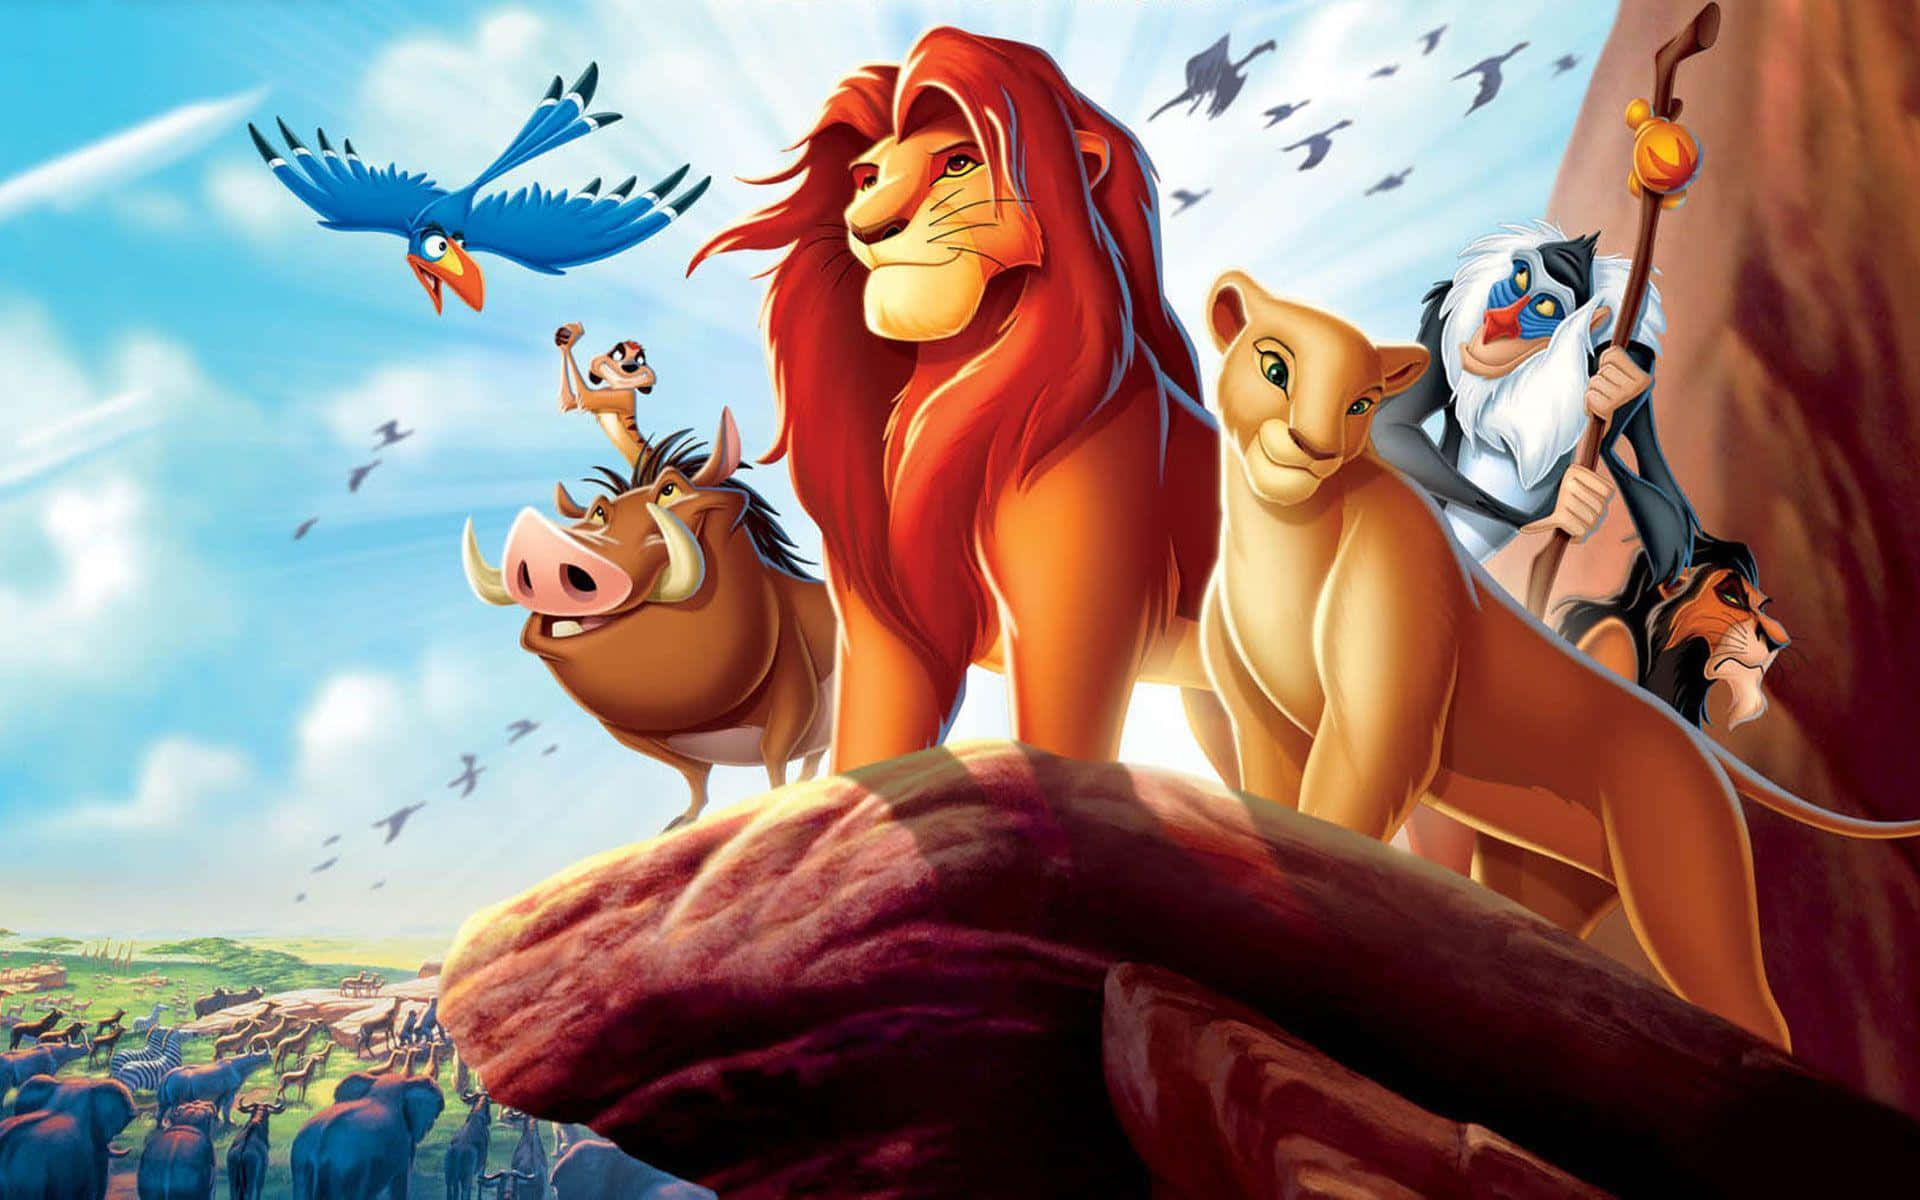 Experience the Epic Tale of "The Lion King"